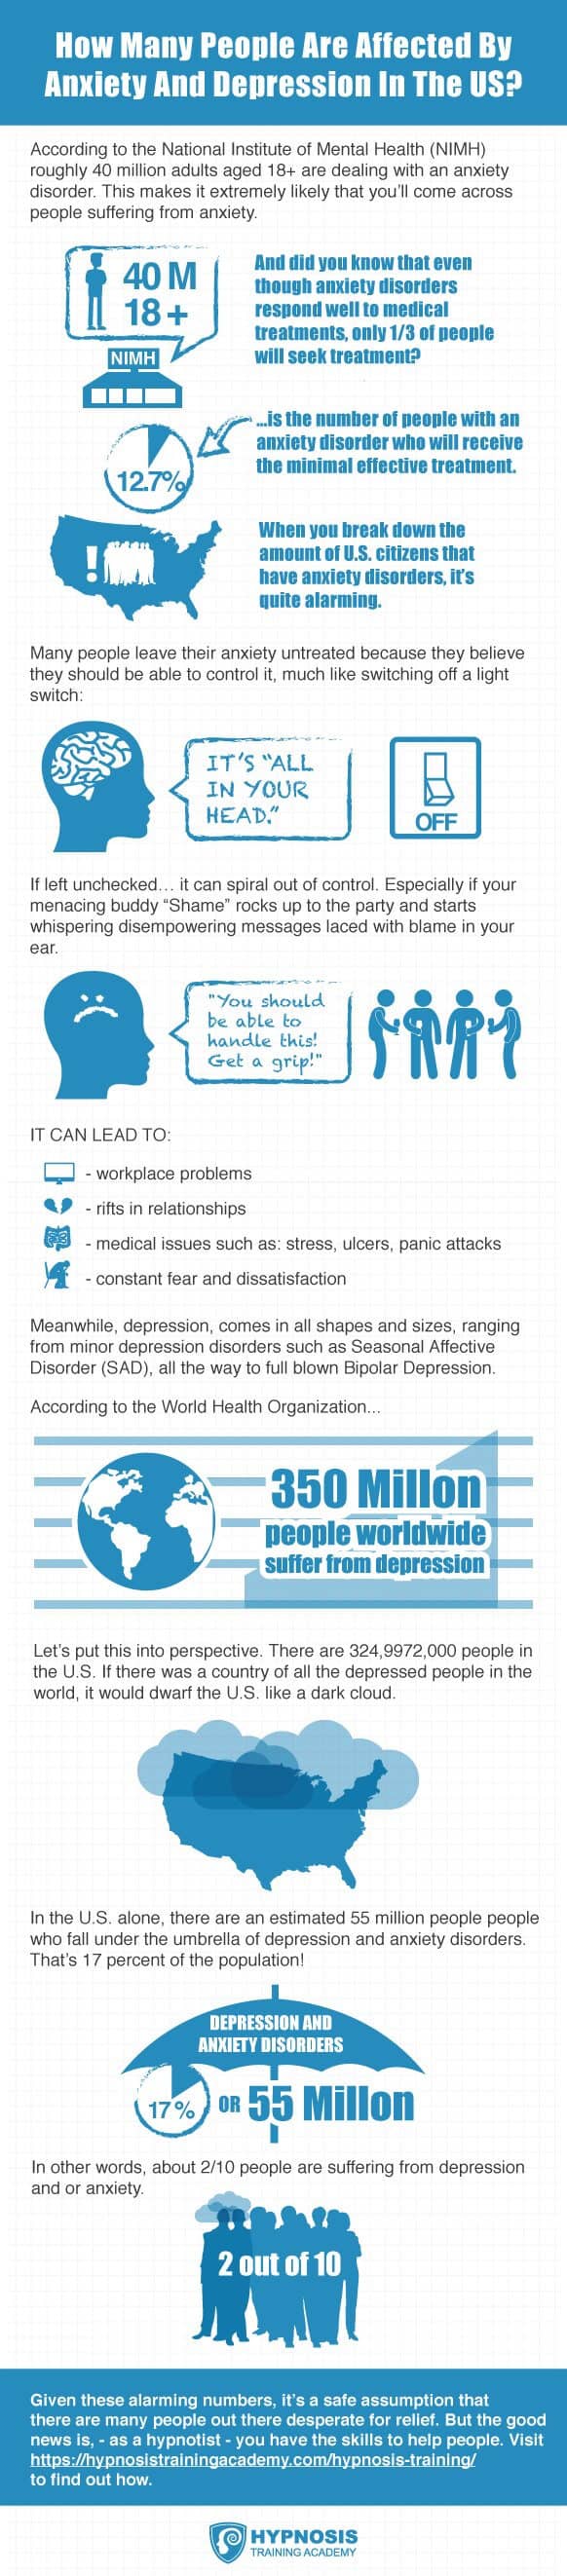 how many people have depression anxiety disorders infographic